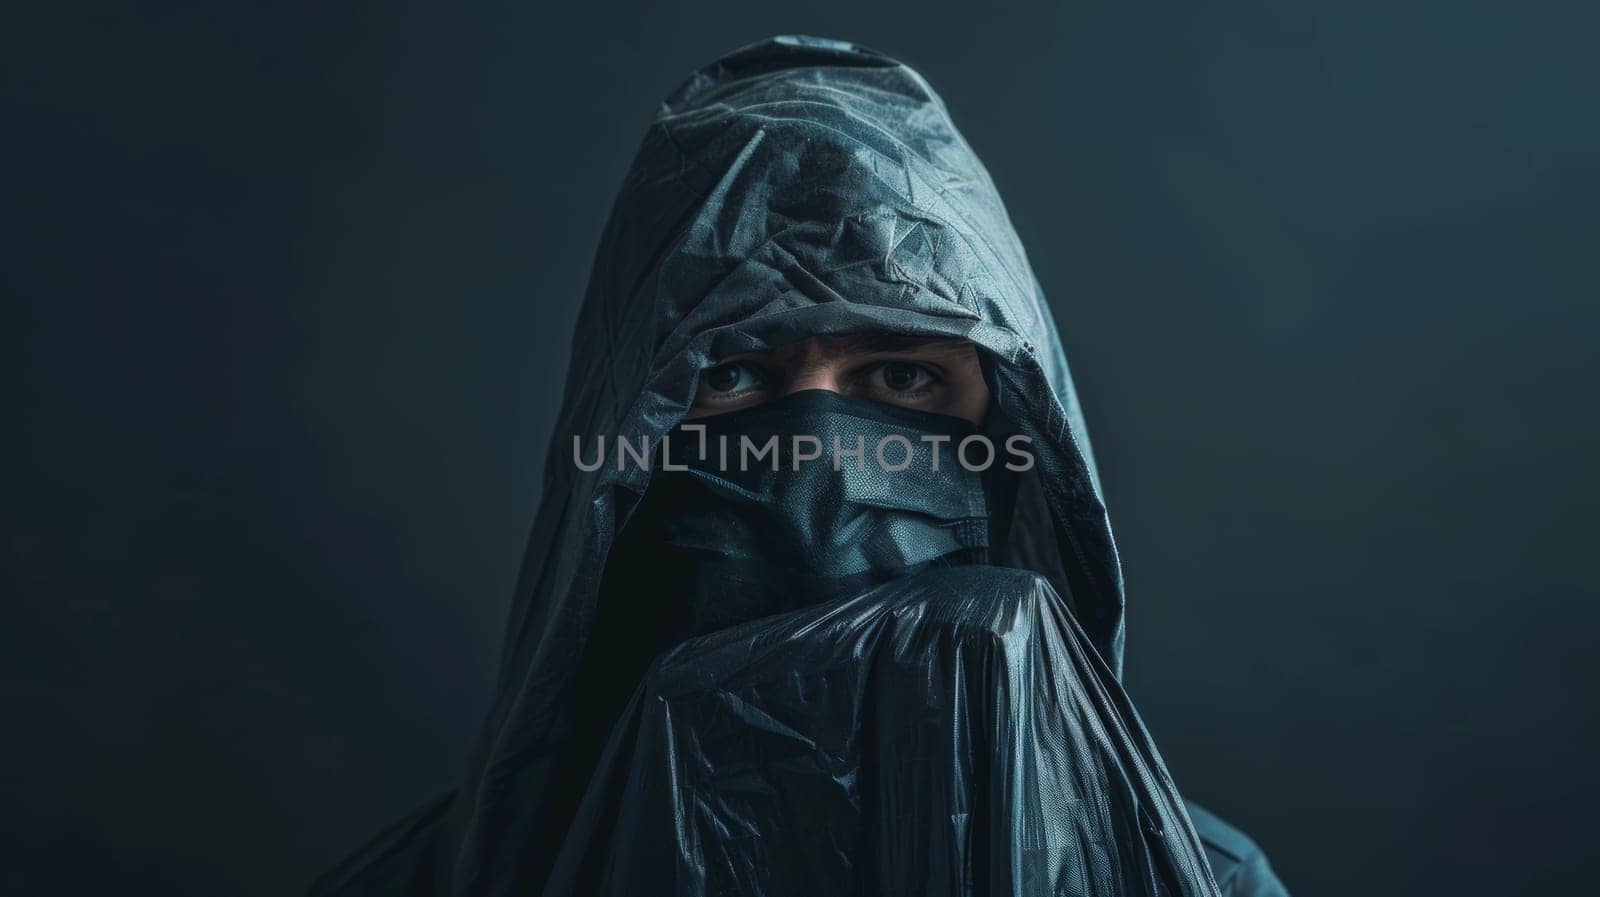 A person wearing a hoodie and plastic bag over their head, AI by starush